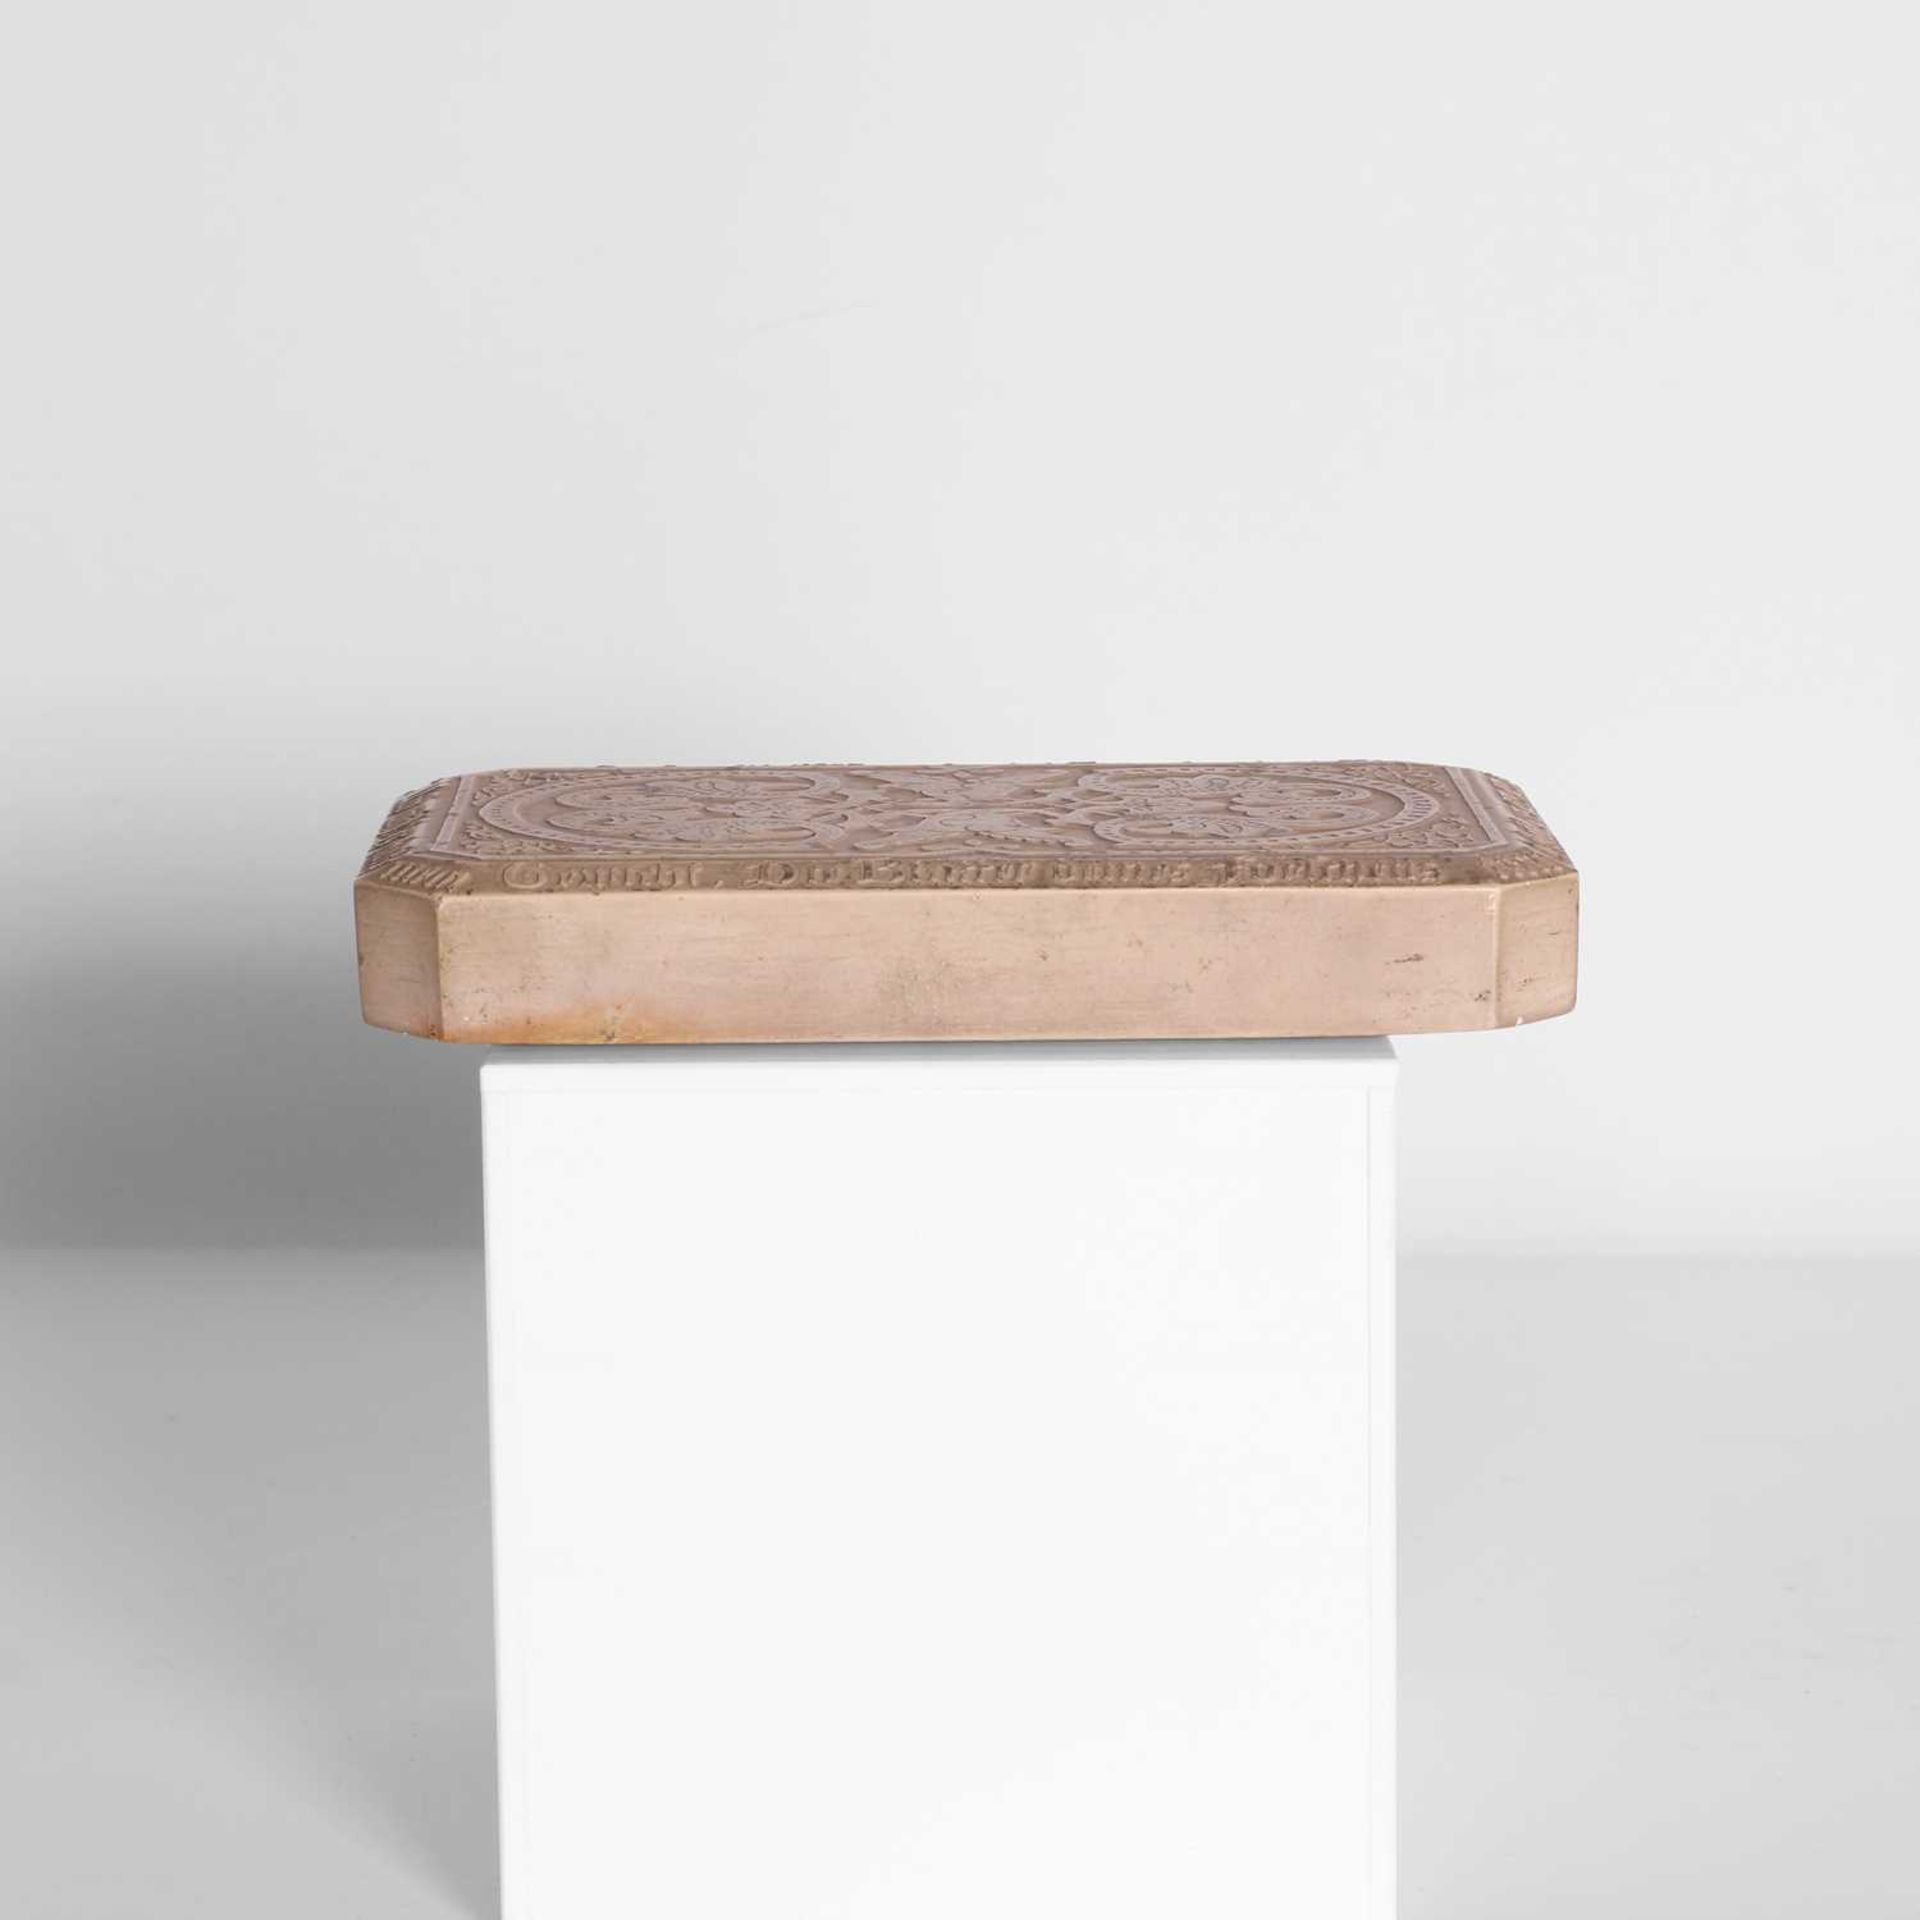 A limestone desk weight, - Image 3 of 4